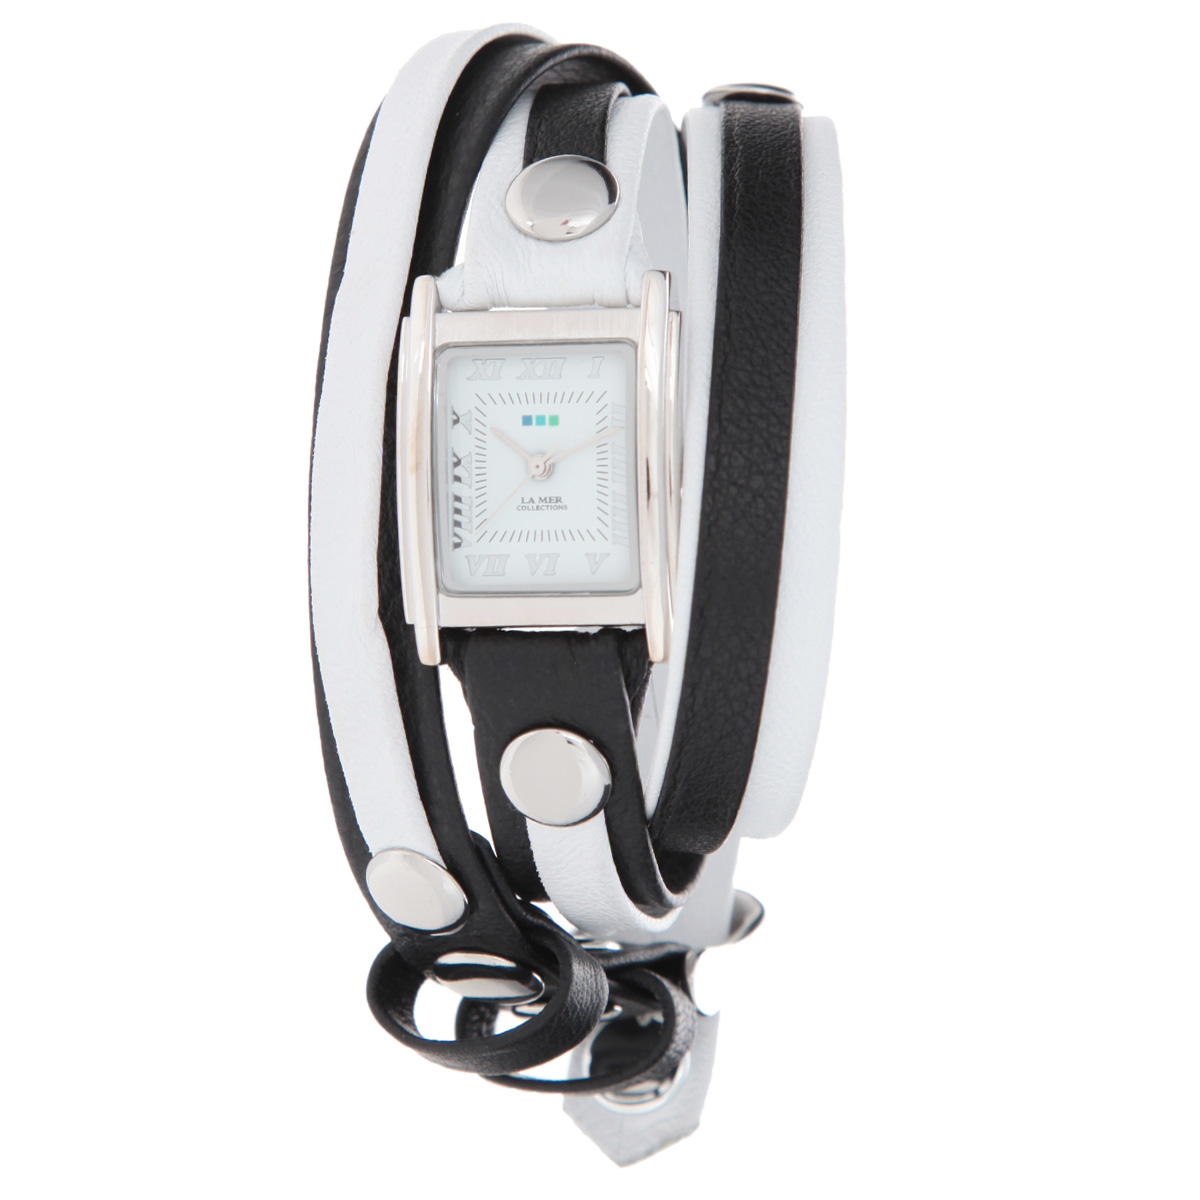    La Mer Collections Layer Mixed Black White Silver Square. LMLWMIX003 - La Mer Collections - La Mer CollectionsLMLWMIX003   La Mer Collections         .      SEIKO.  ,     ,   ,    -       .      ,  .   ,        .     .          ,      La Mer Collection. :  : 25  23  8 .  : 550  13 .   .  .    .    : 6 .